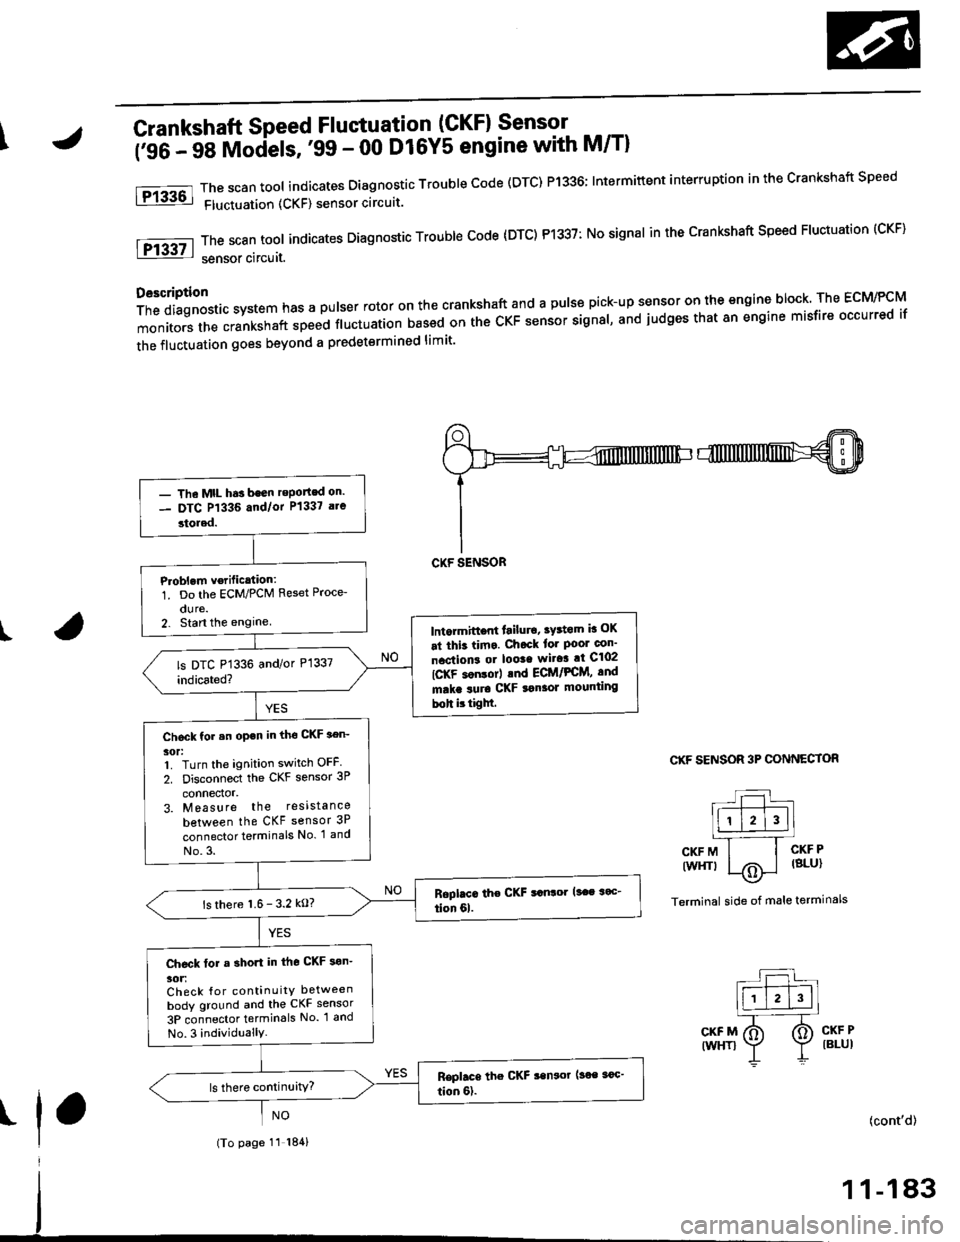 HONDA CIVIC 1996 6.G Owners Manual \Crankshaft Speed Fluctuation (GKFI Sensor .
firC- 48 Models, 99 - 00 D16Y5 engine with M/Tl
The scan tool indicates Diagnostic Trouble Code (DTC) P1336; Intermiftent interruption in the Crankshaft S